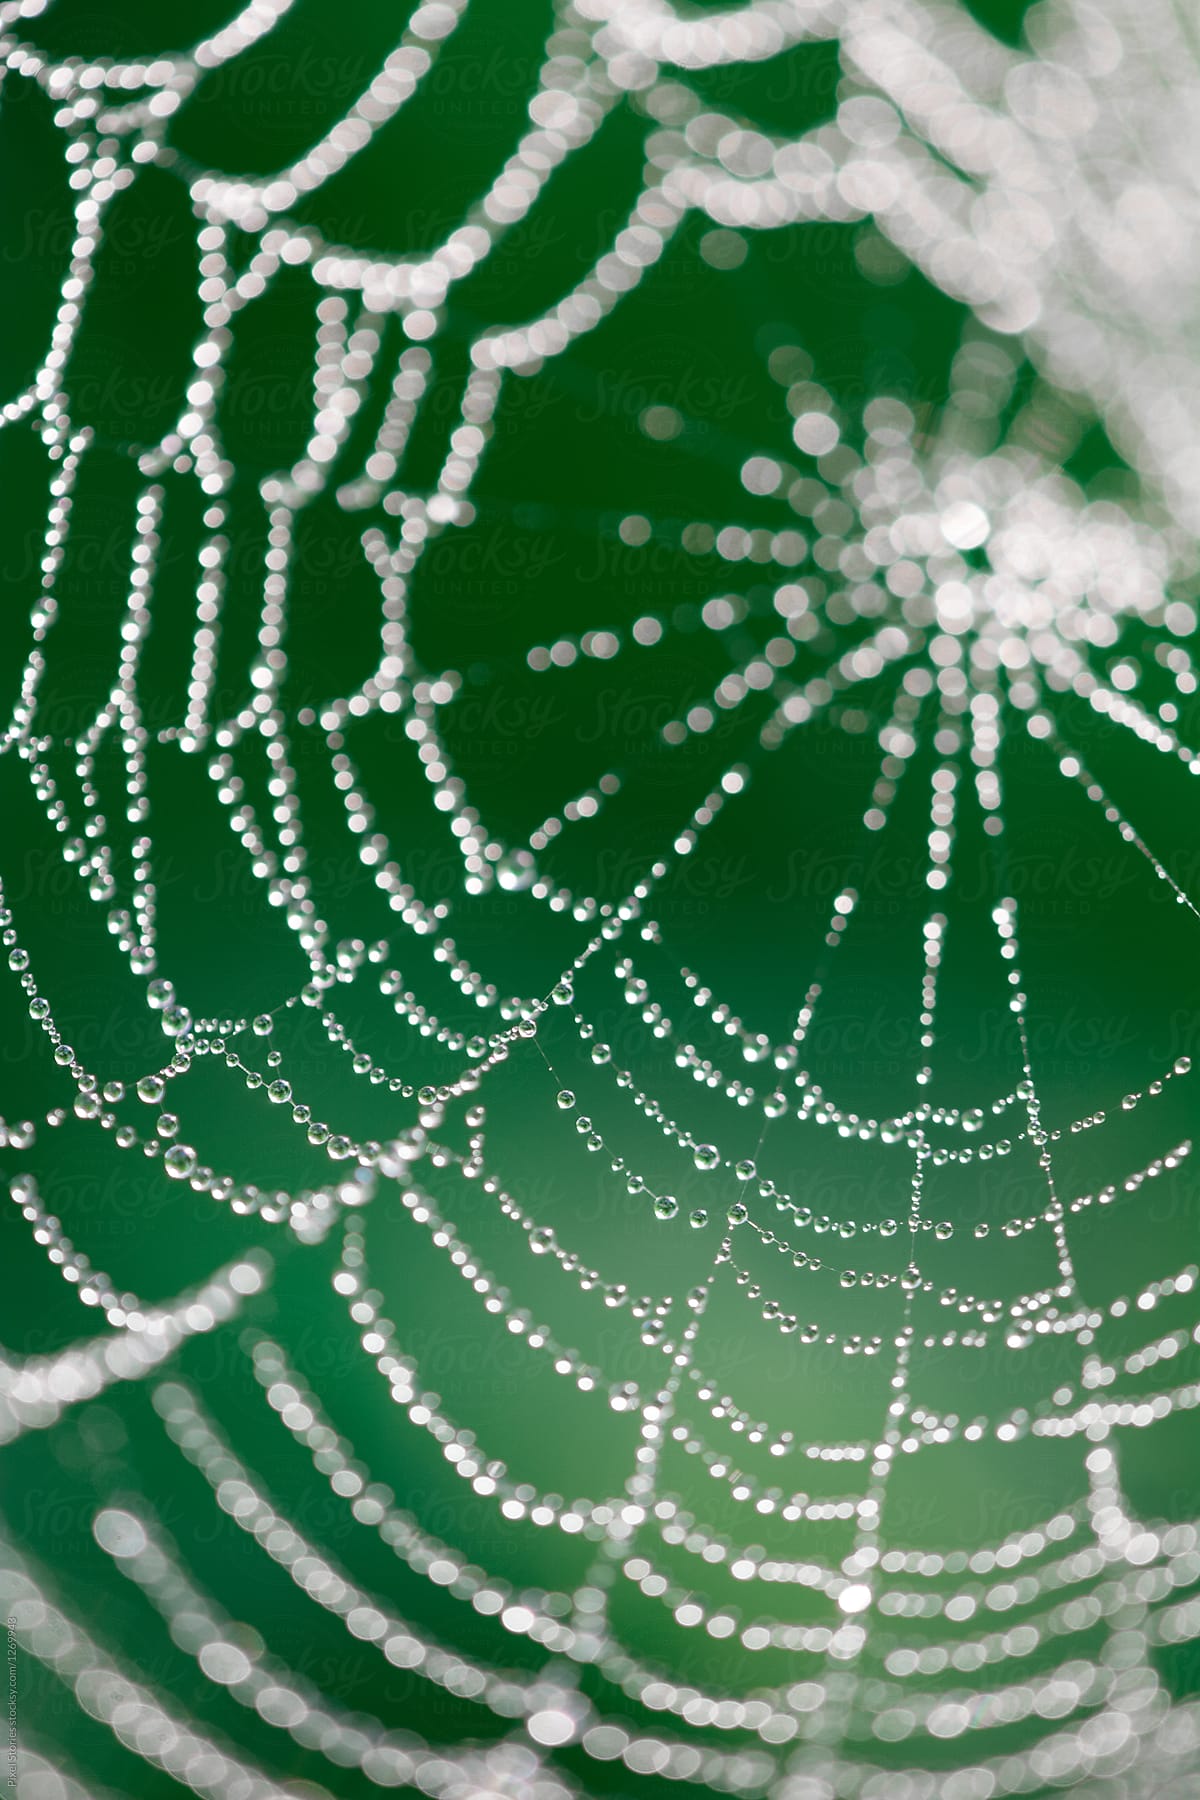 Spiderweb covered with dew